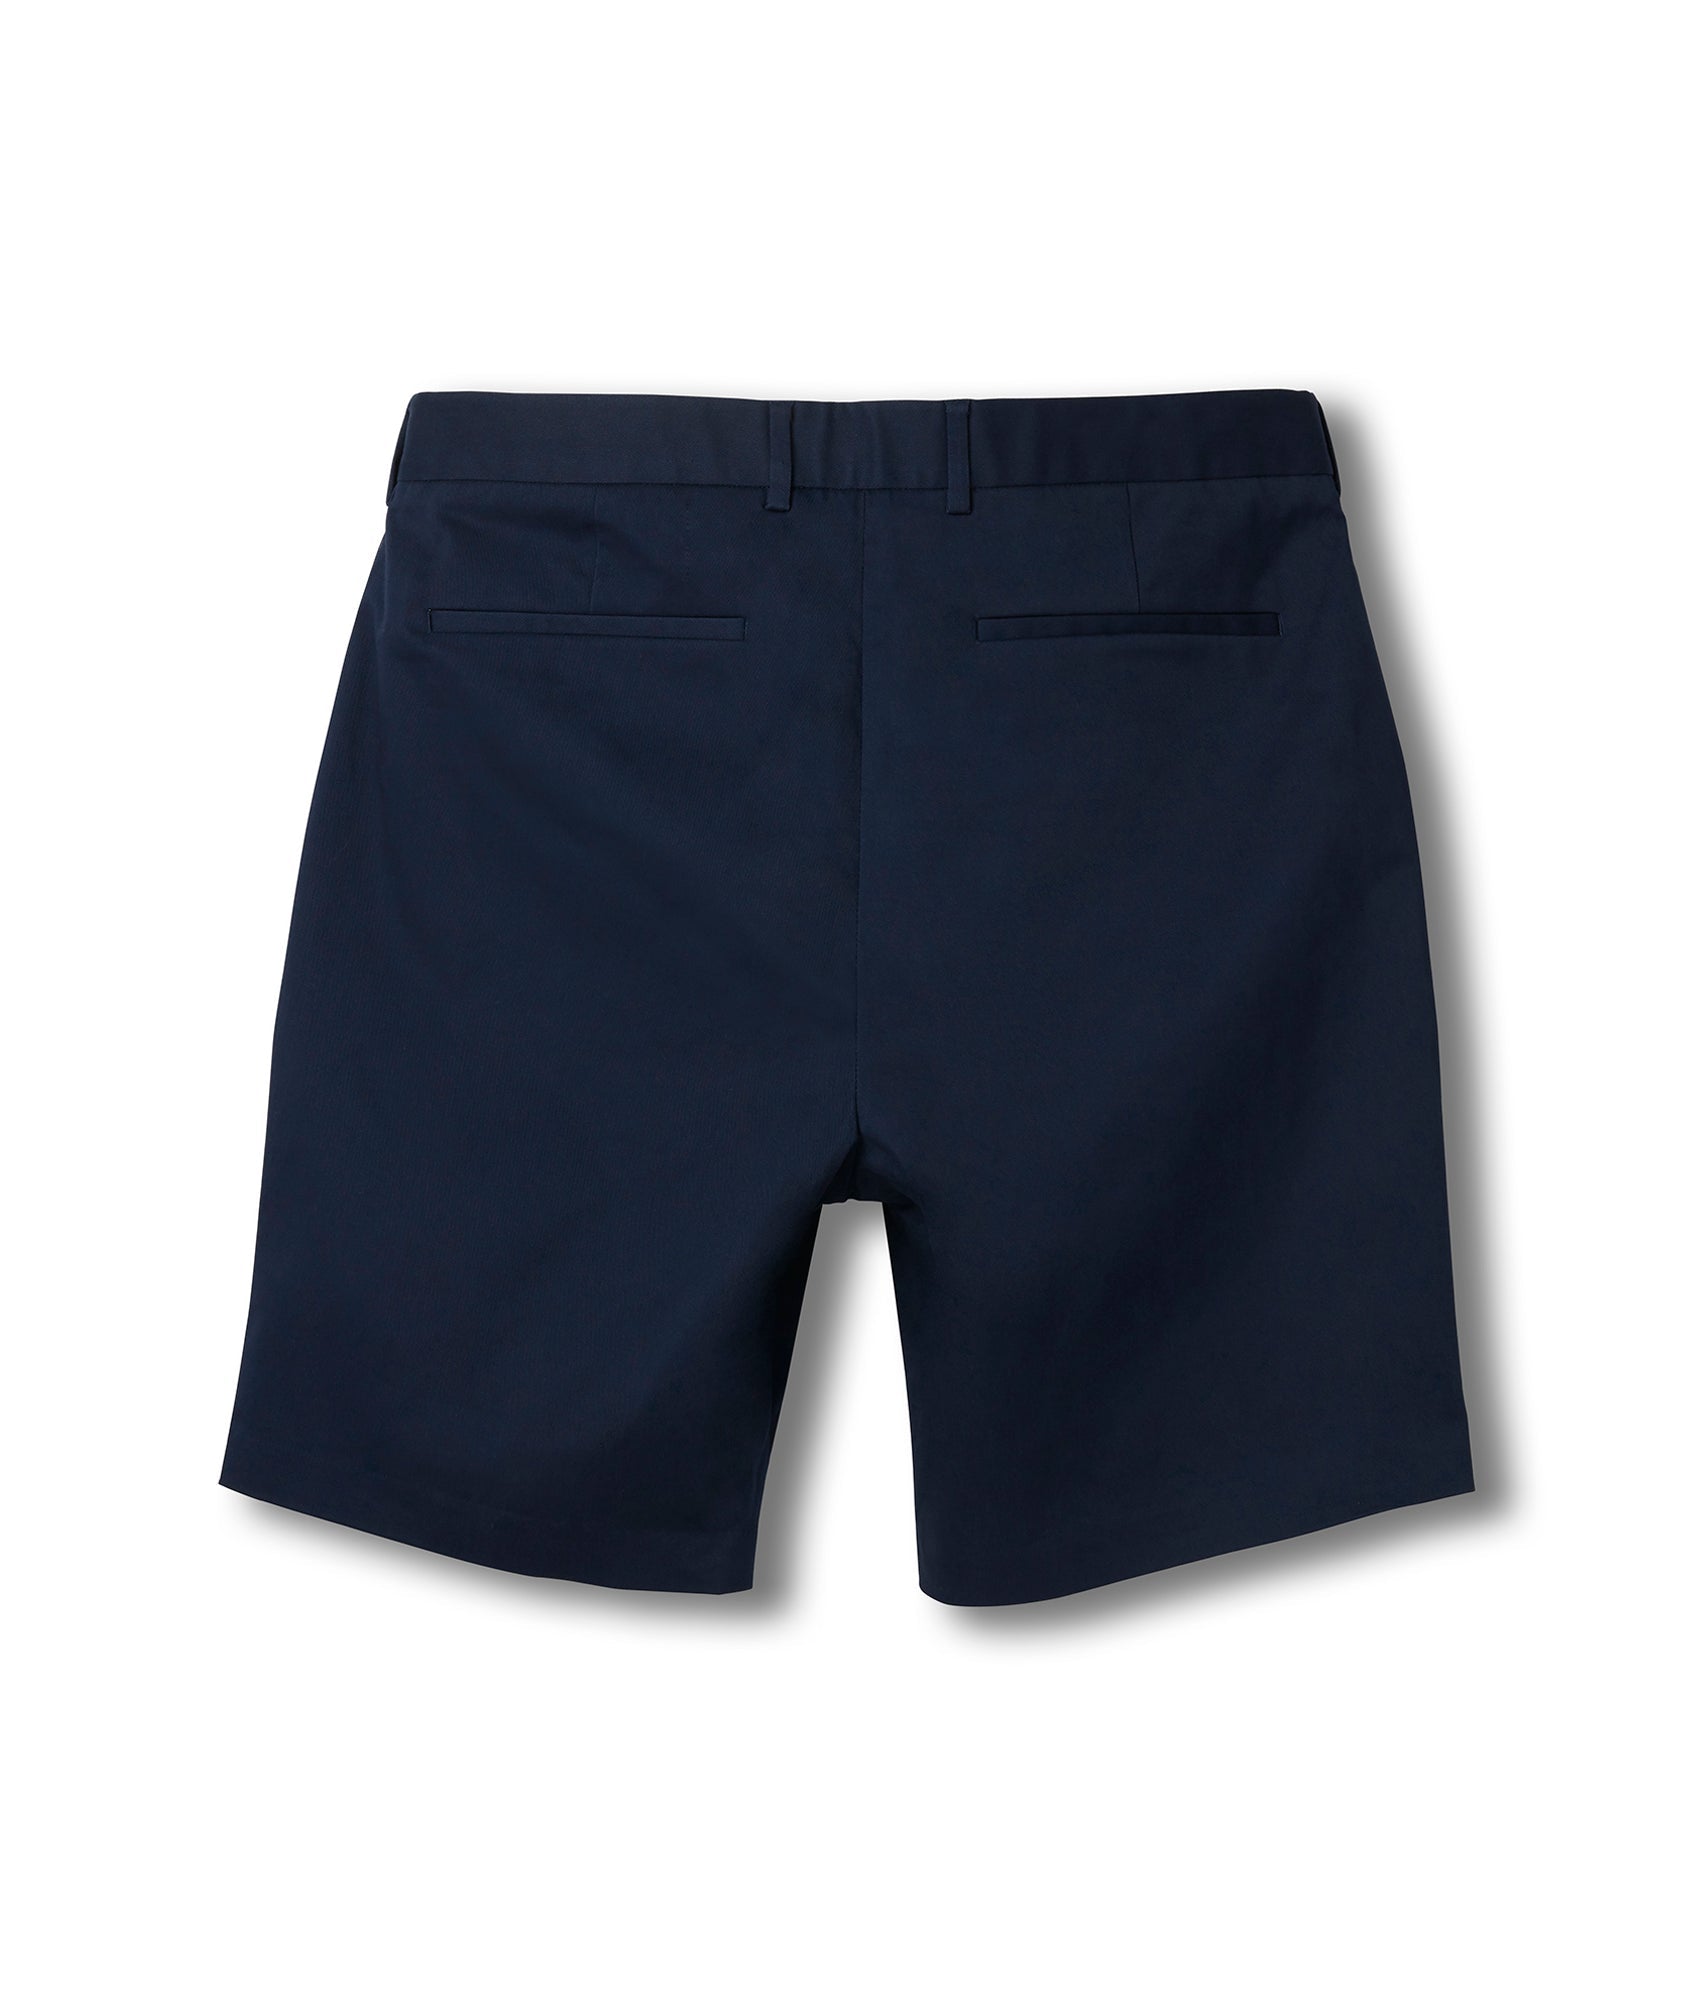 Solid ‘Fordham’ Flat Front Easy-Care Chino Twill Short with Magnetic Closures in Navy